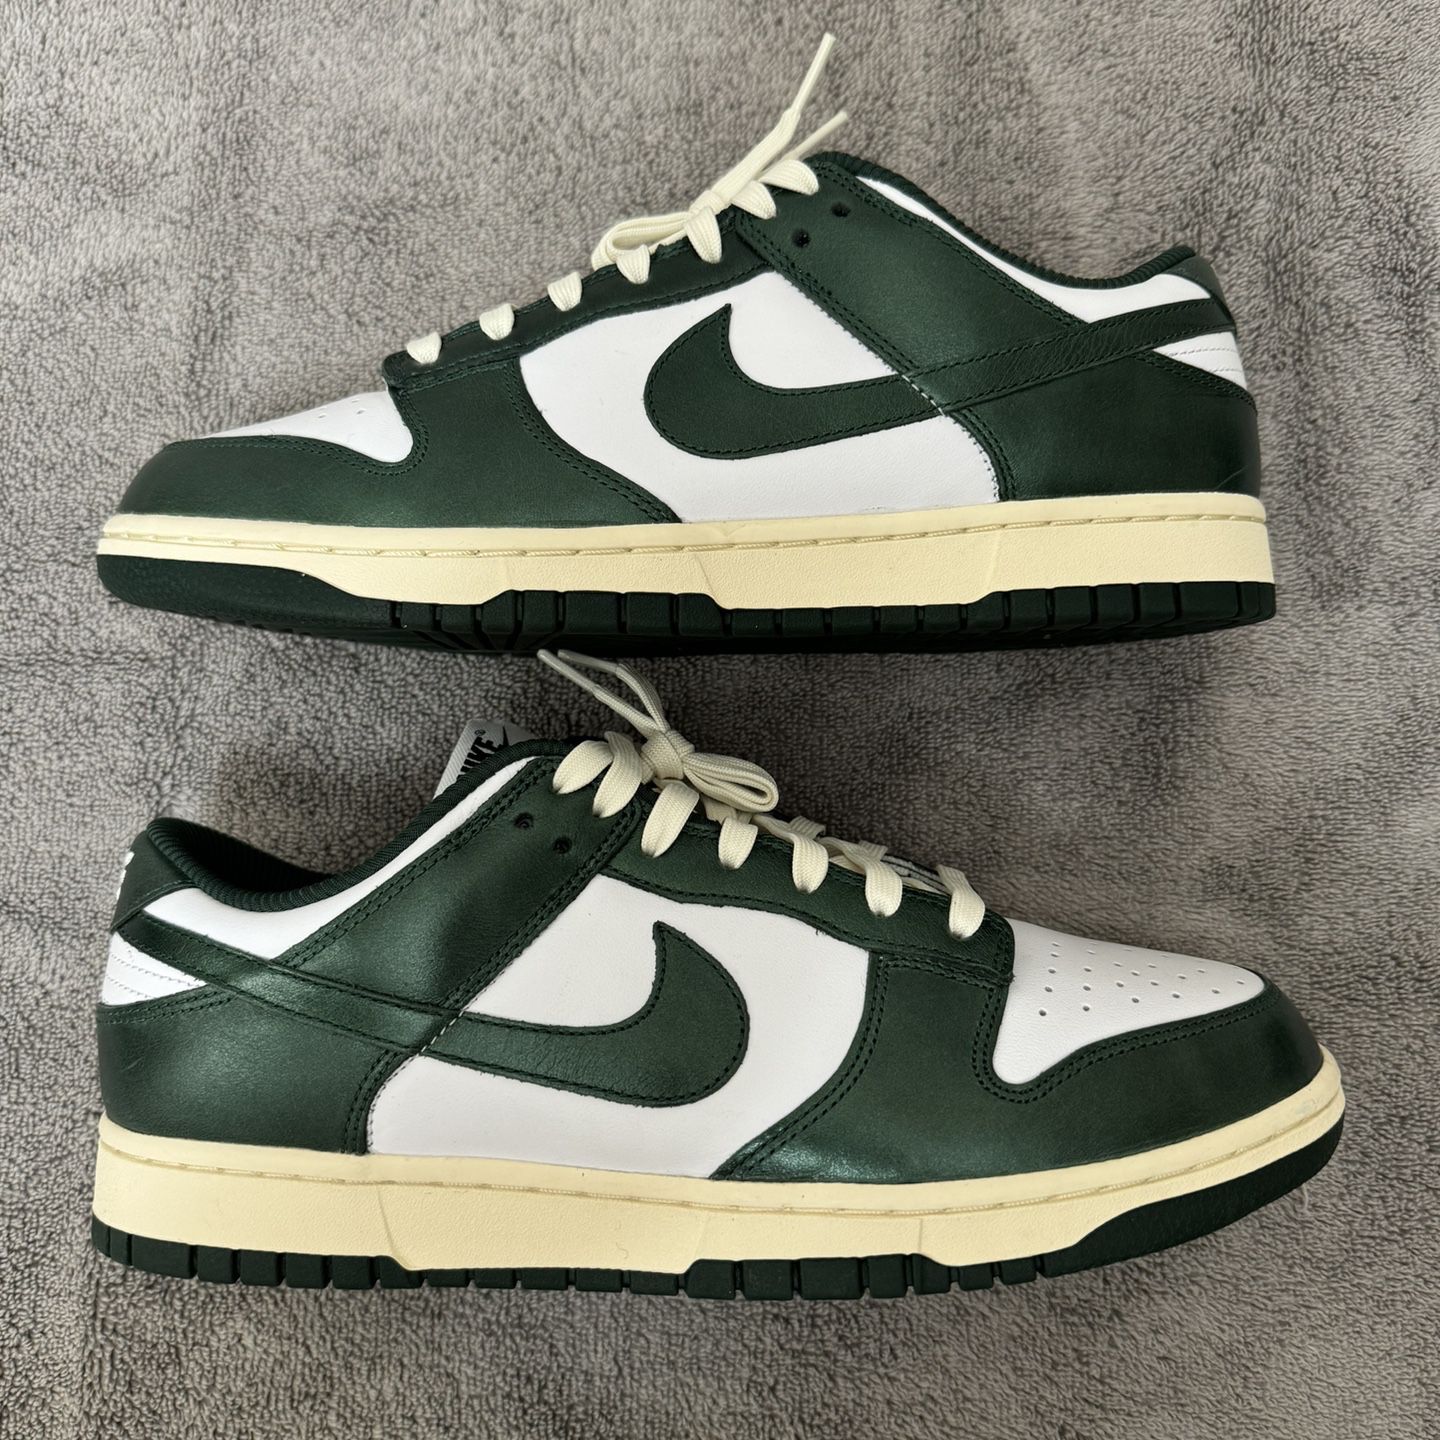 2022 Wmns Dunk Low 'Vintage Green' / Size 11.5W 10M, Used